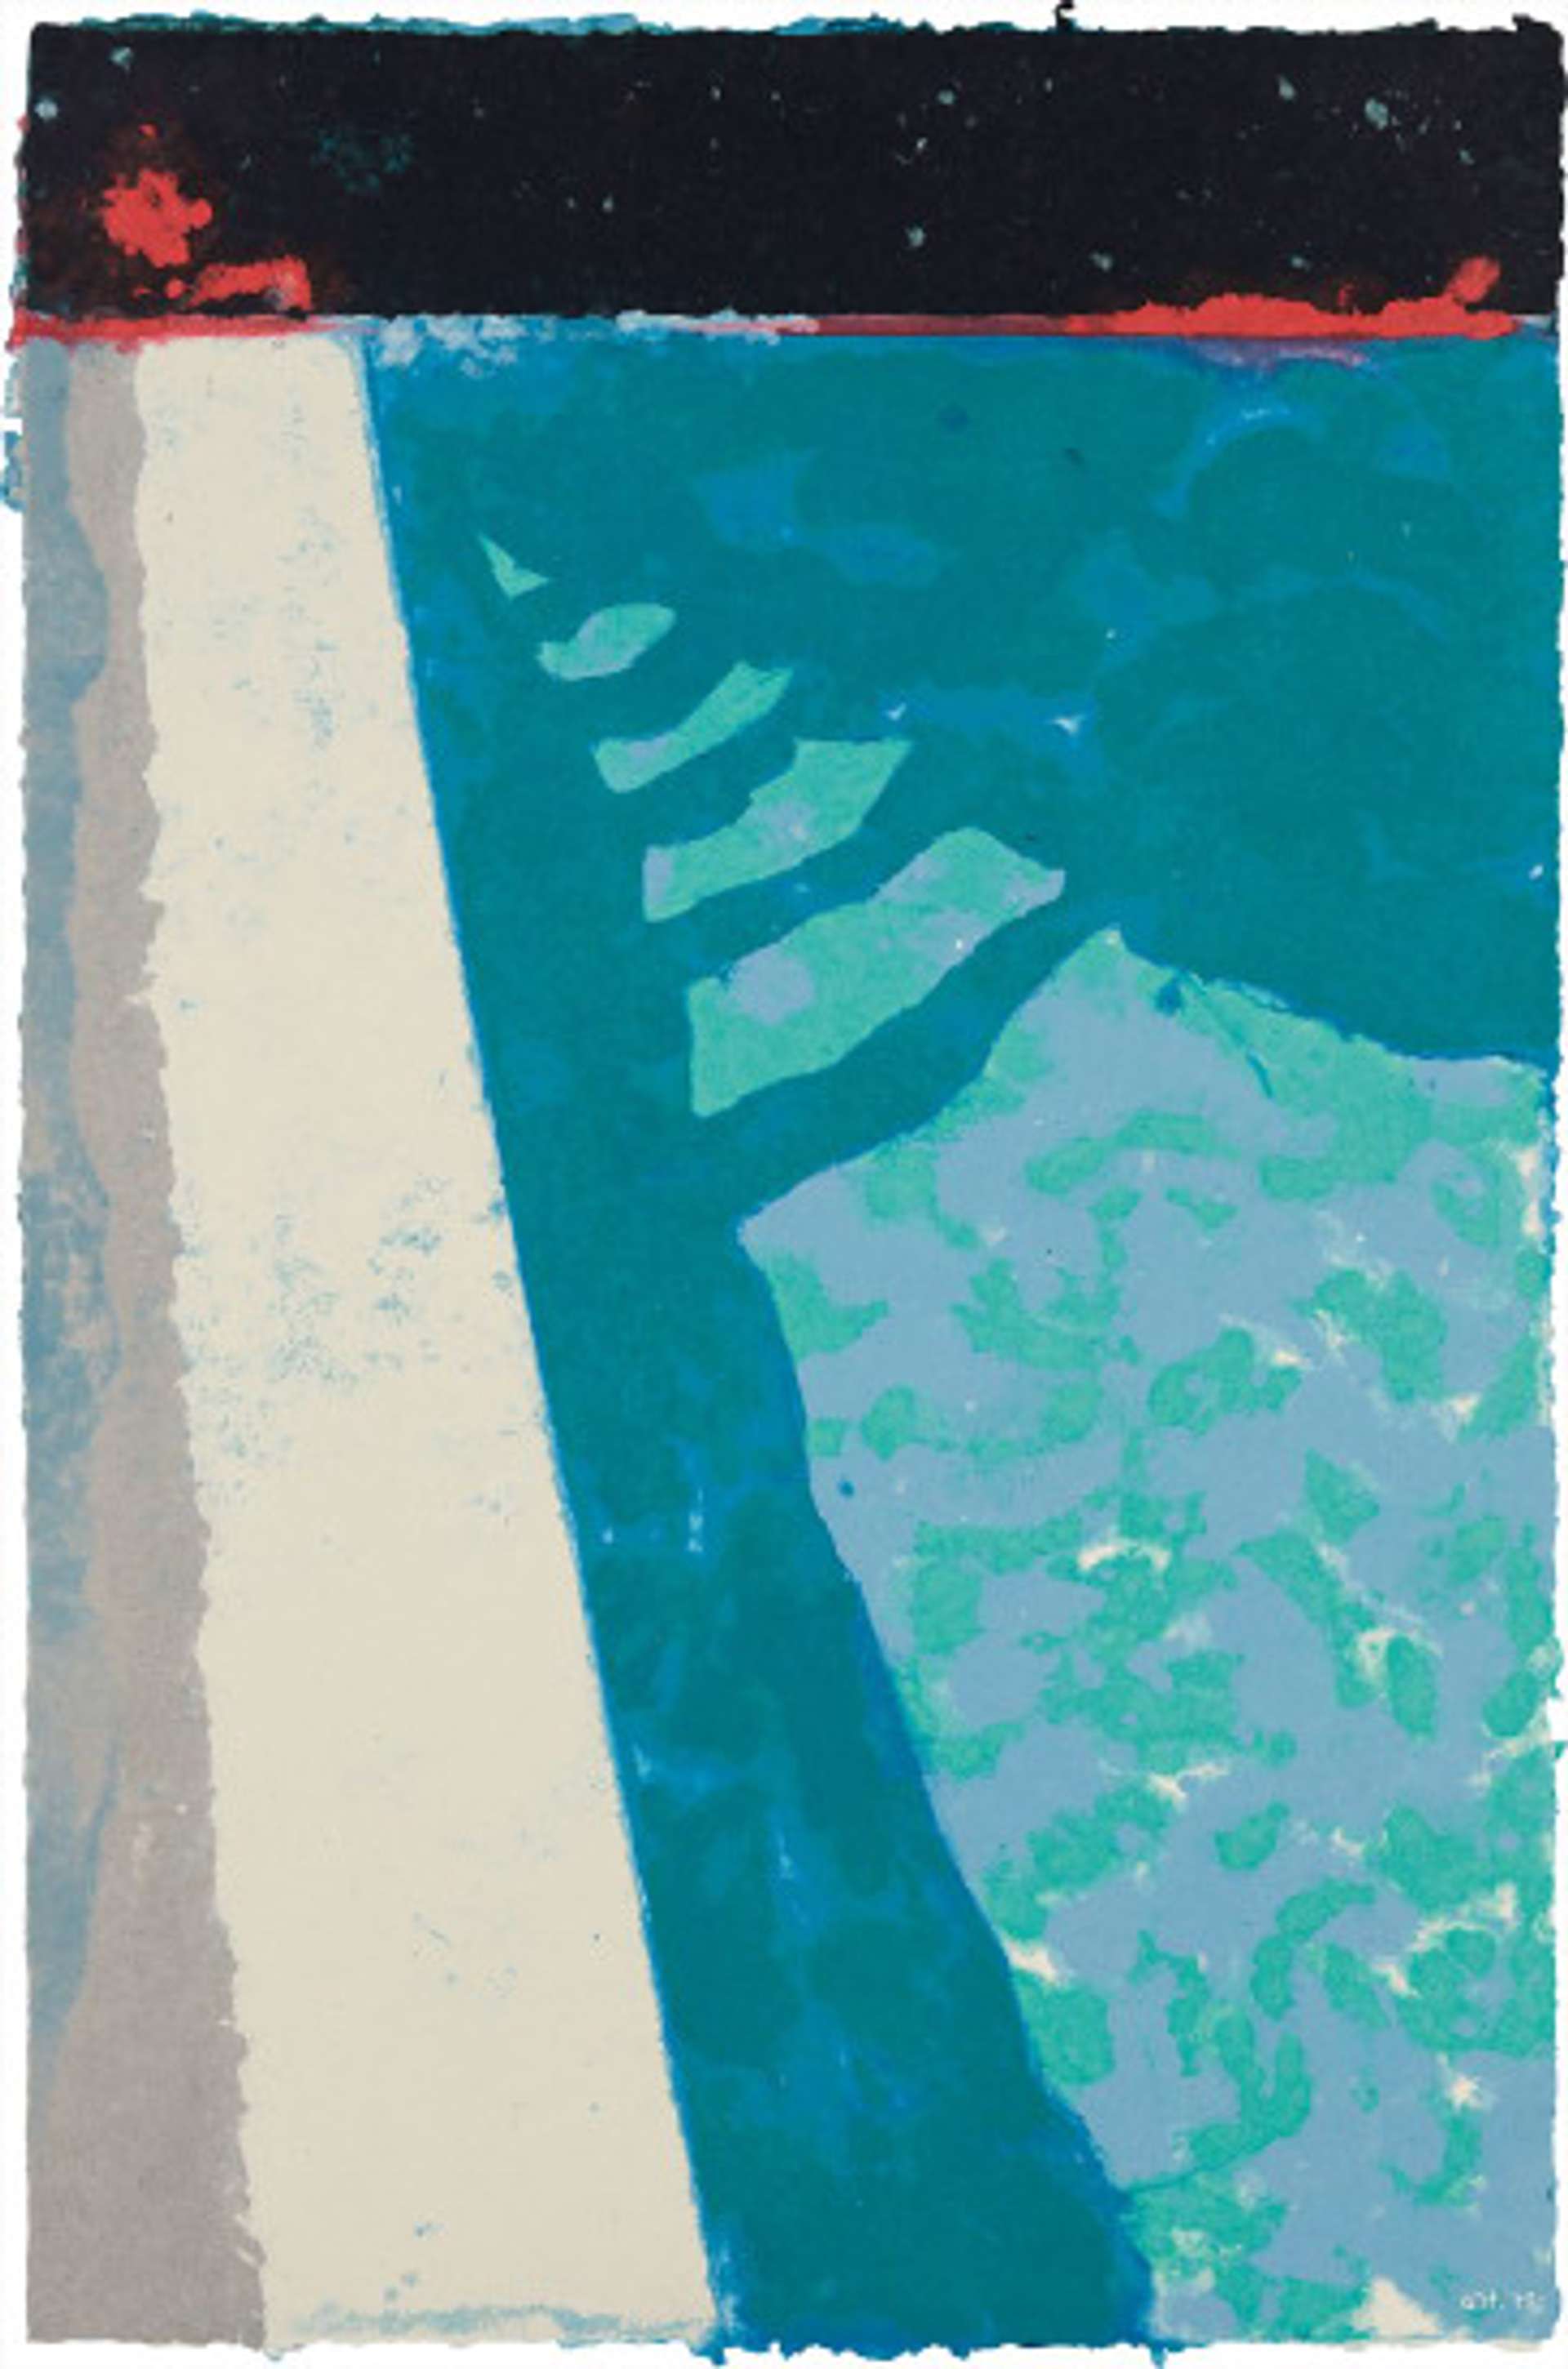 A depiction of a swimming pool from a high vantage point. The clear, green-blue water stretches up the right half of the composition, with the edge of the pool in white at the left. With a darker shade of blue, Hockney delineates the shadows cast on the water.